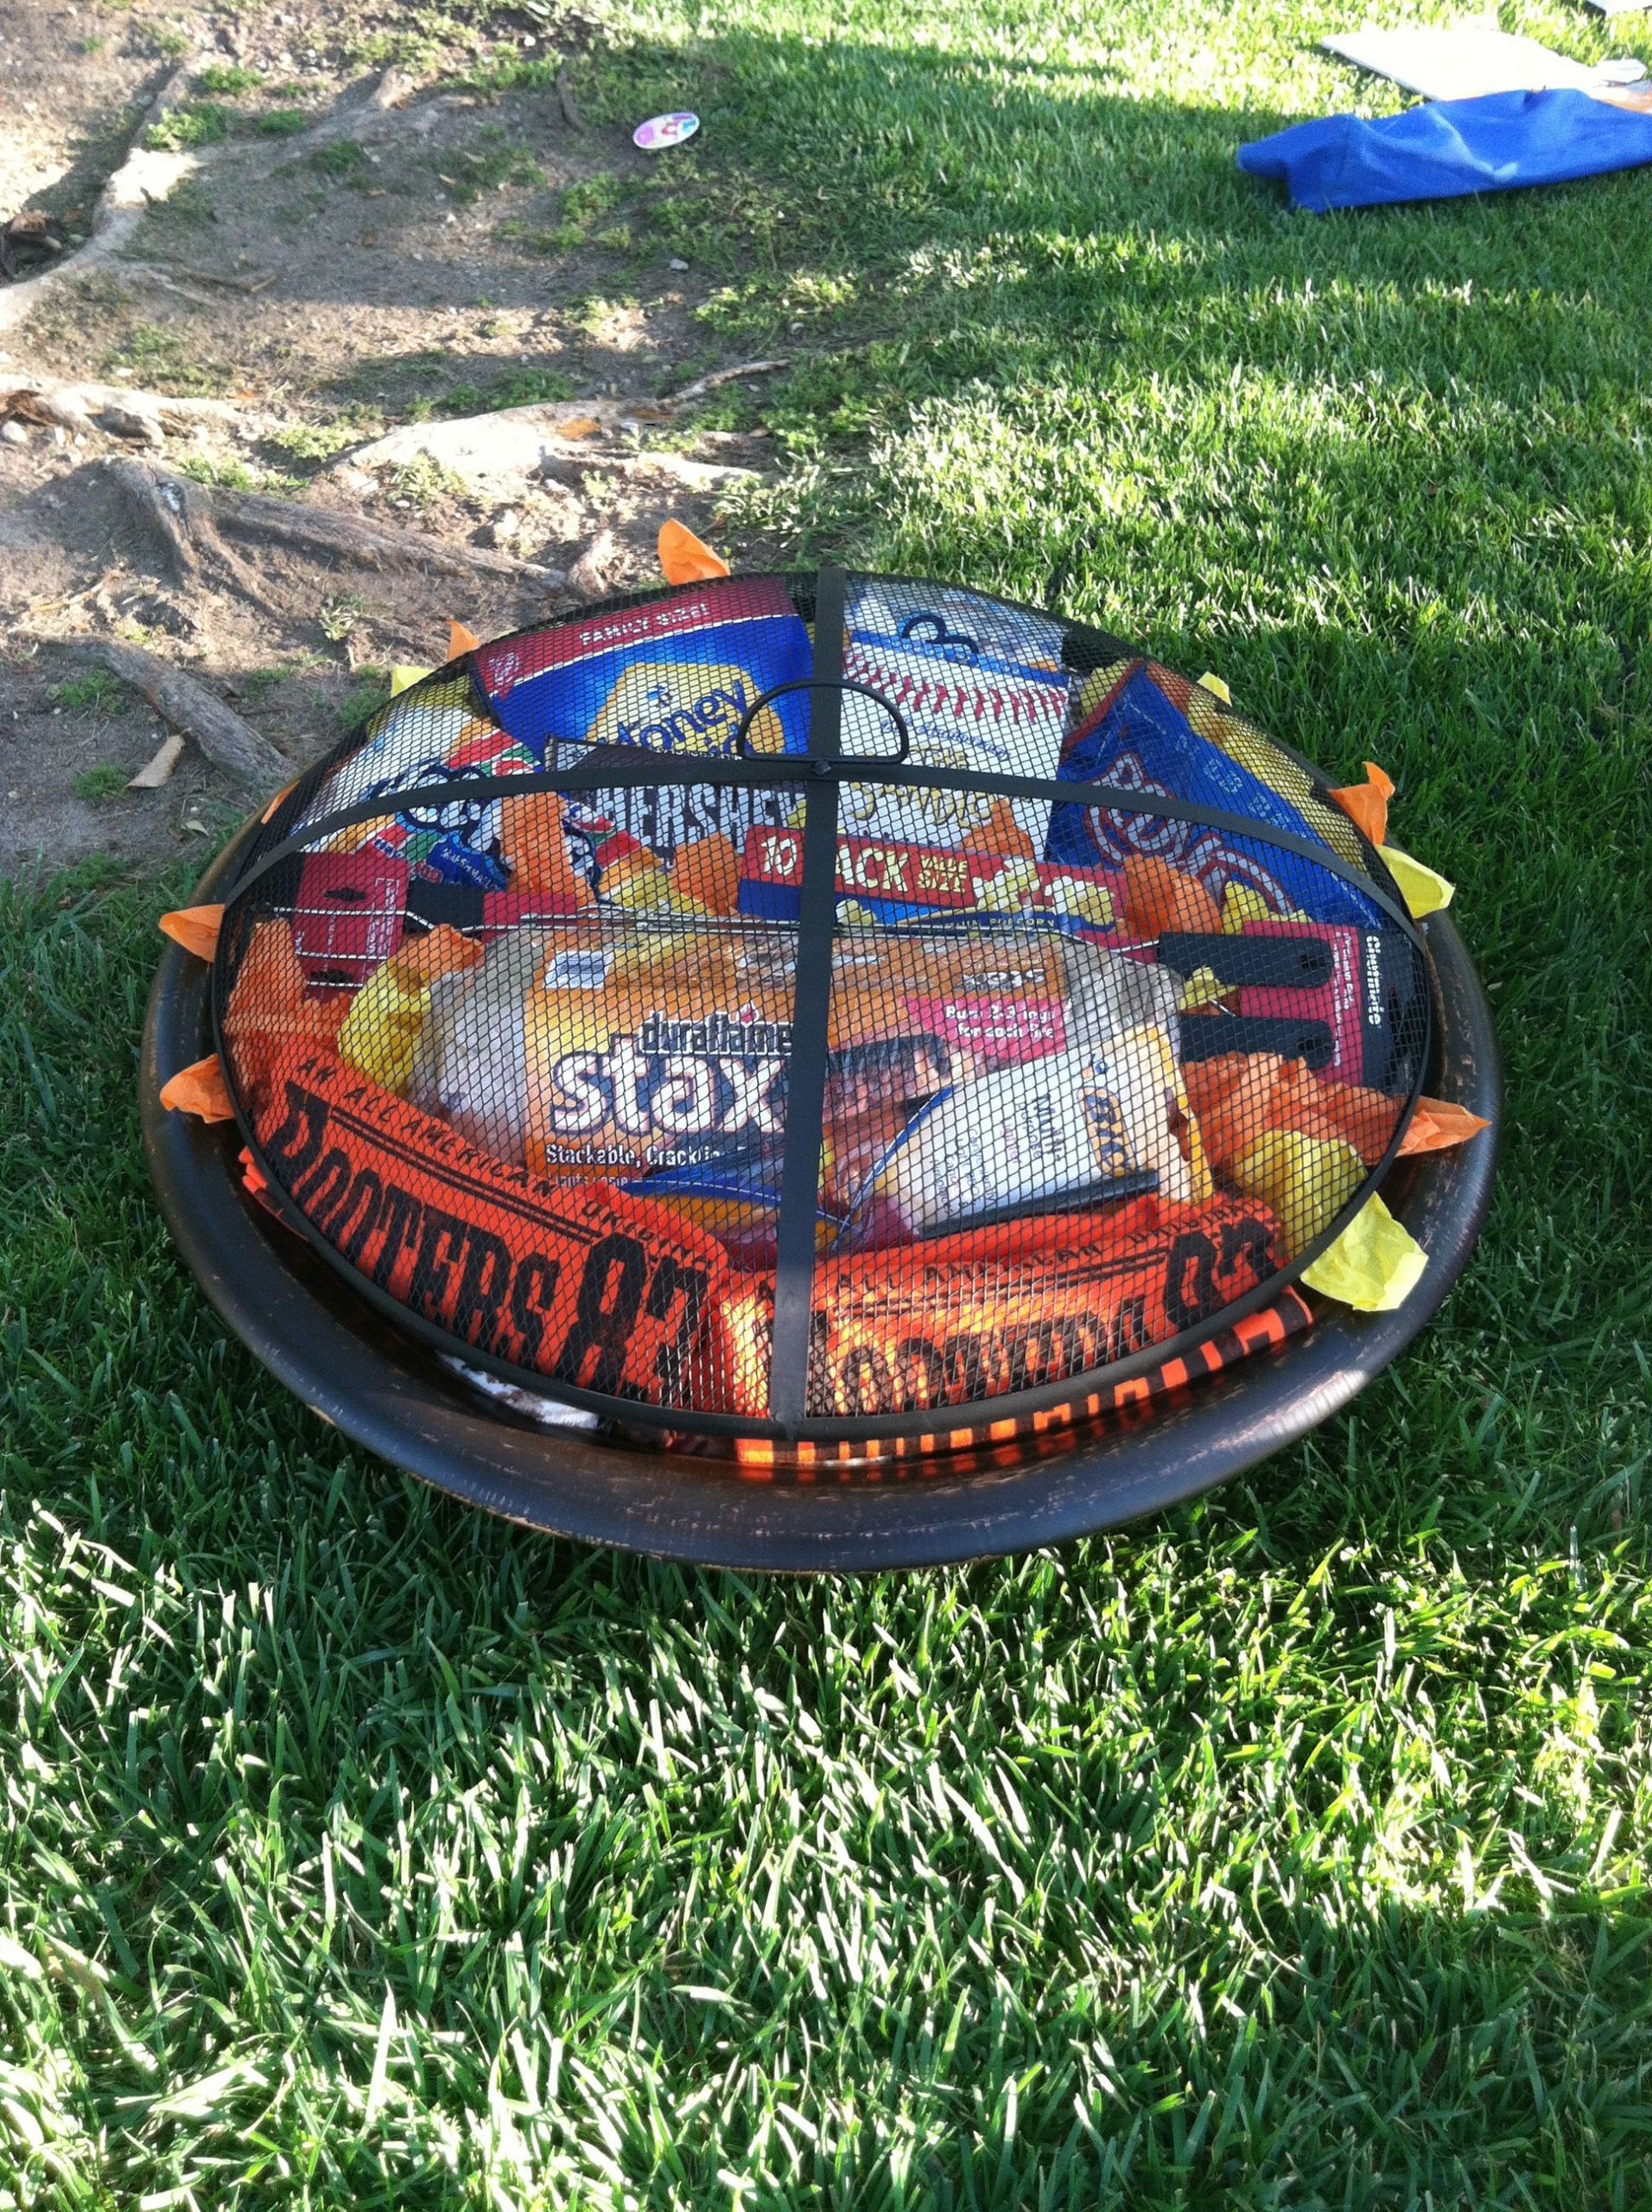 Fire Pit Gift Basket Ideas
 Fire pit t basket silent auction Equipped with stuff